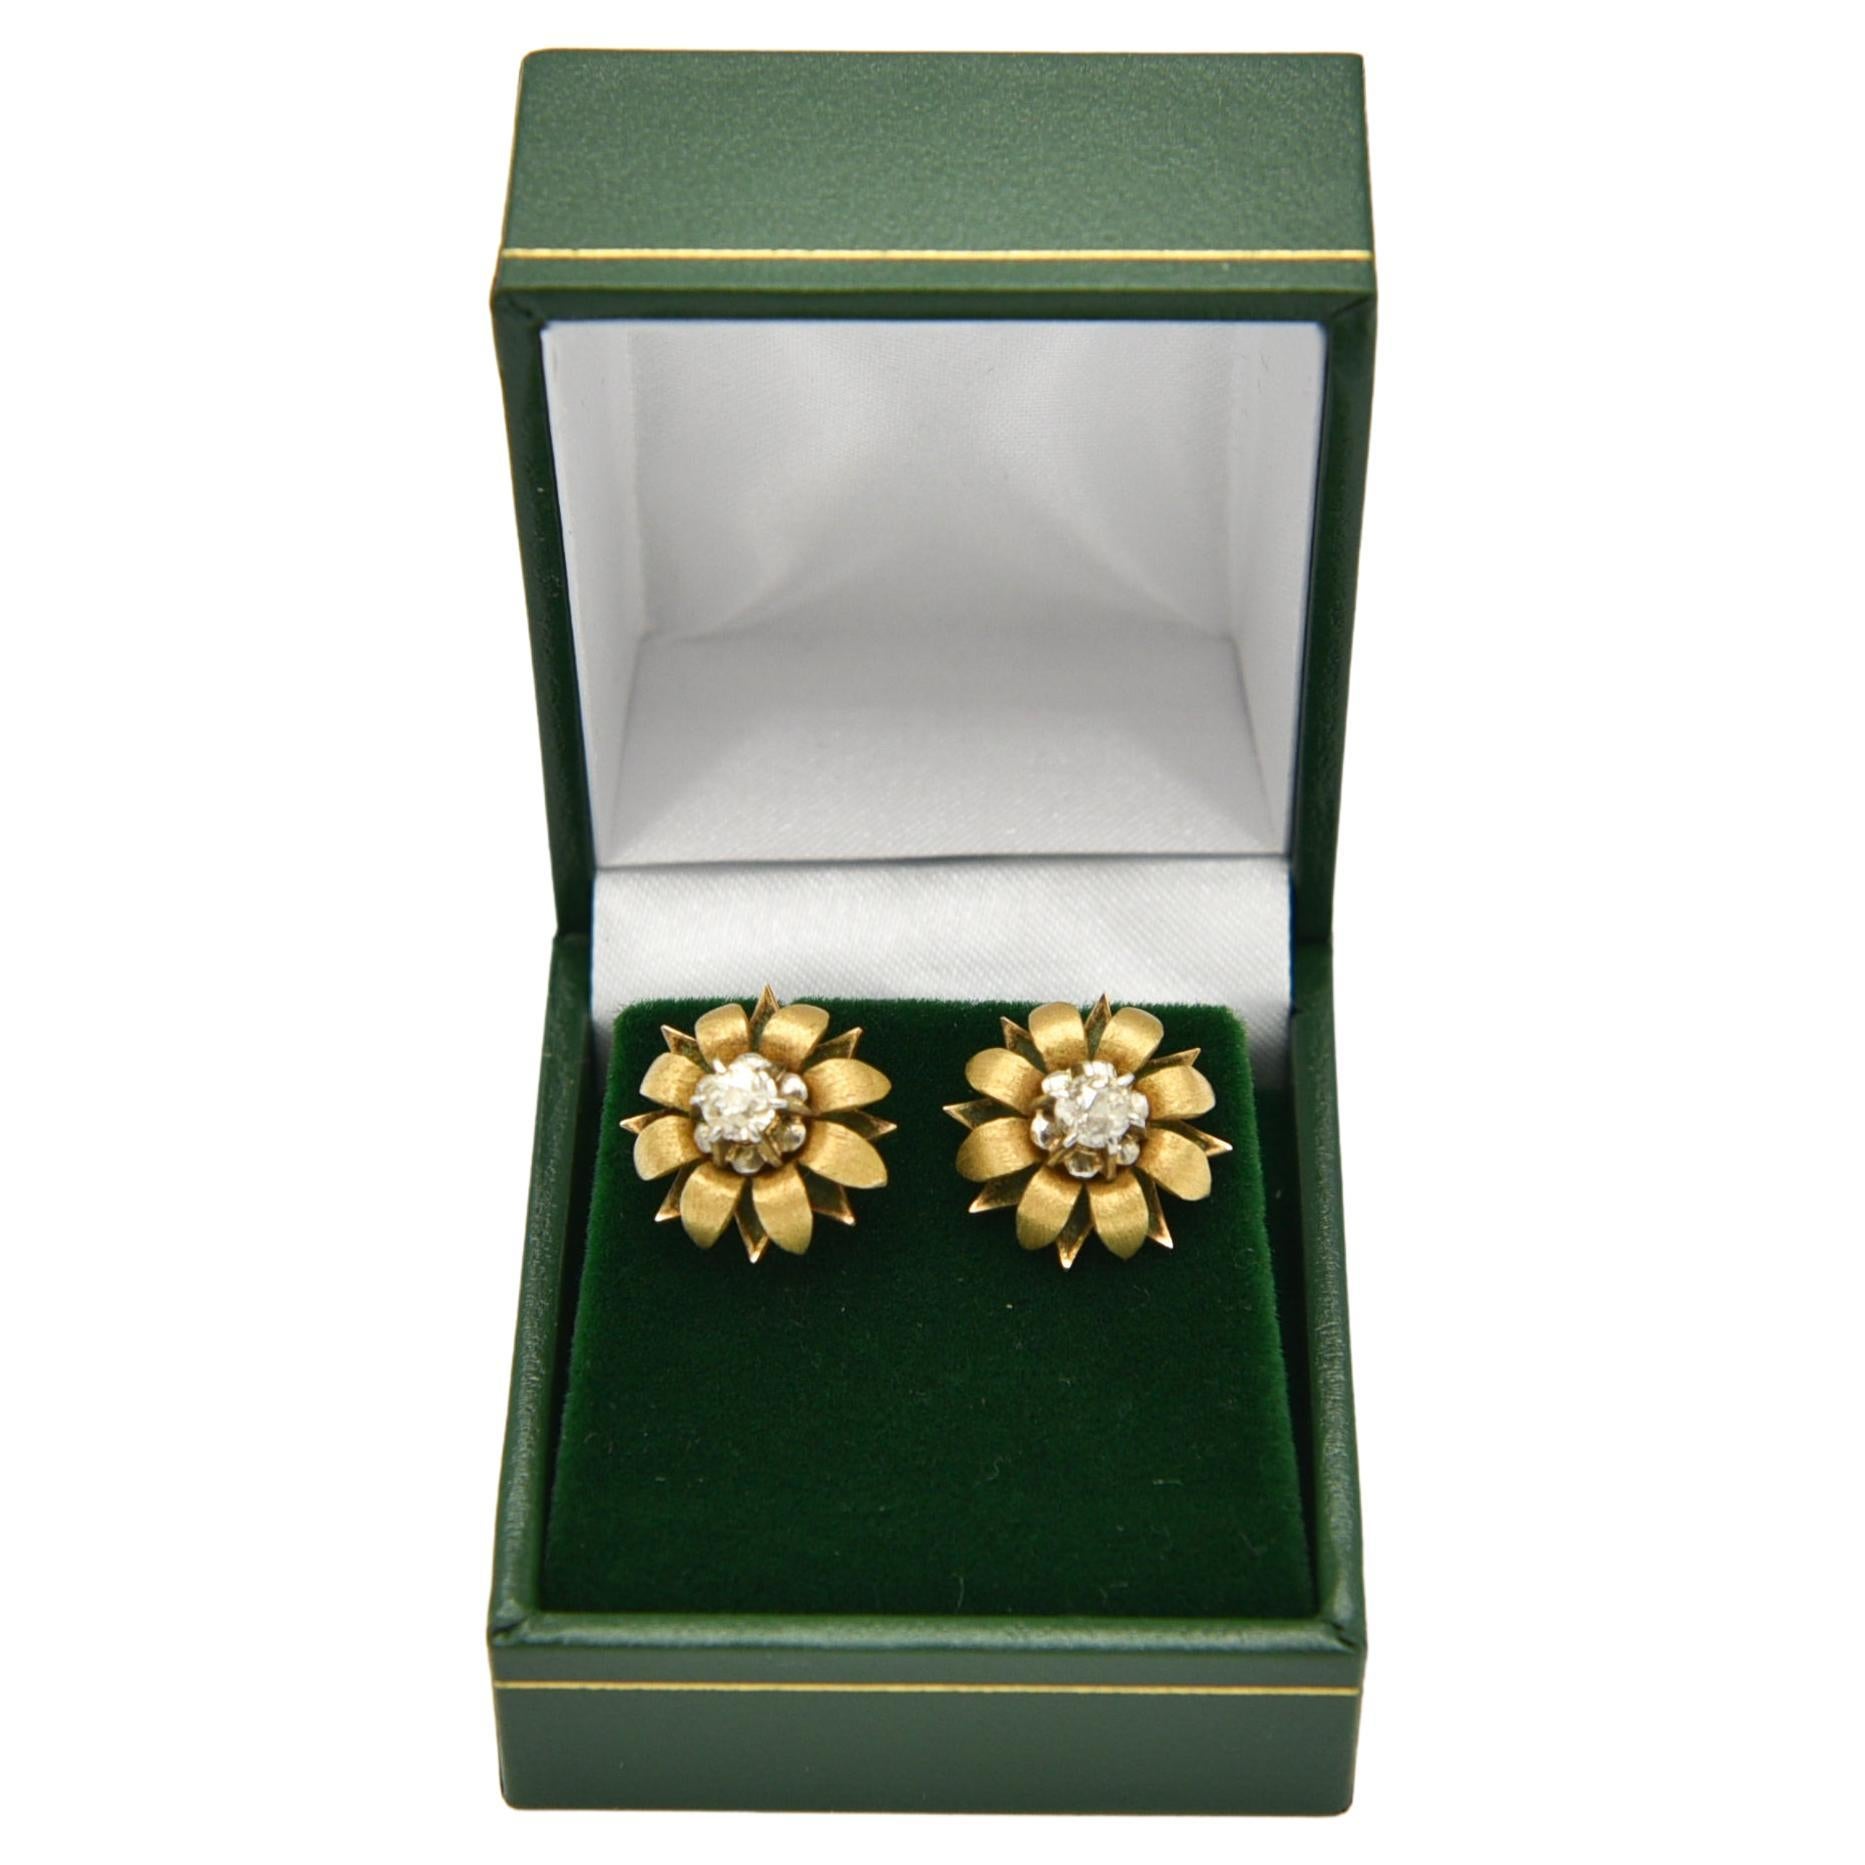 Gold earrings in the shape of flowers with centrally set diamonds of a total weight of about 0.60 ct (color H-I purity SI1-SI2)

Gold fineness: 0.750 (18K)

Origin : Spain around 1940.

Very good condition

item weight: 6.48g

a jewelery certificate